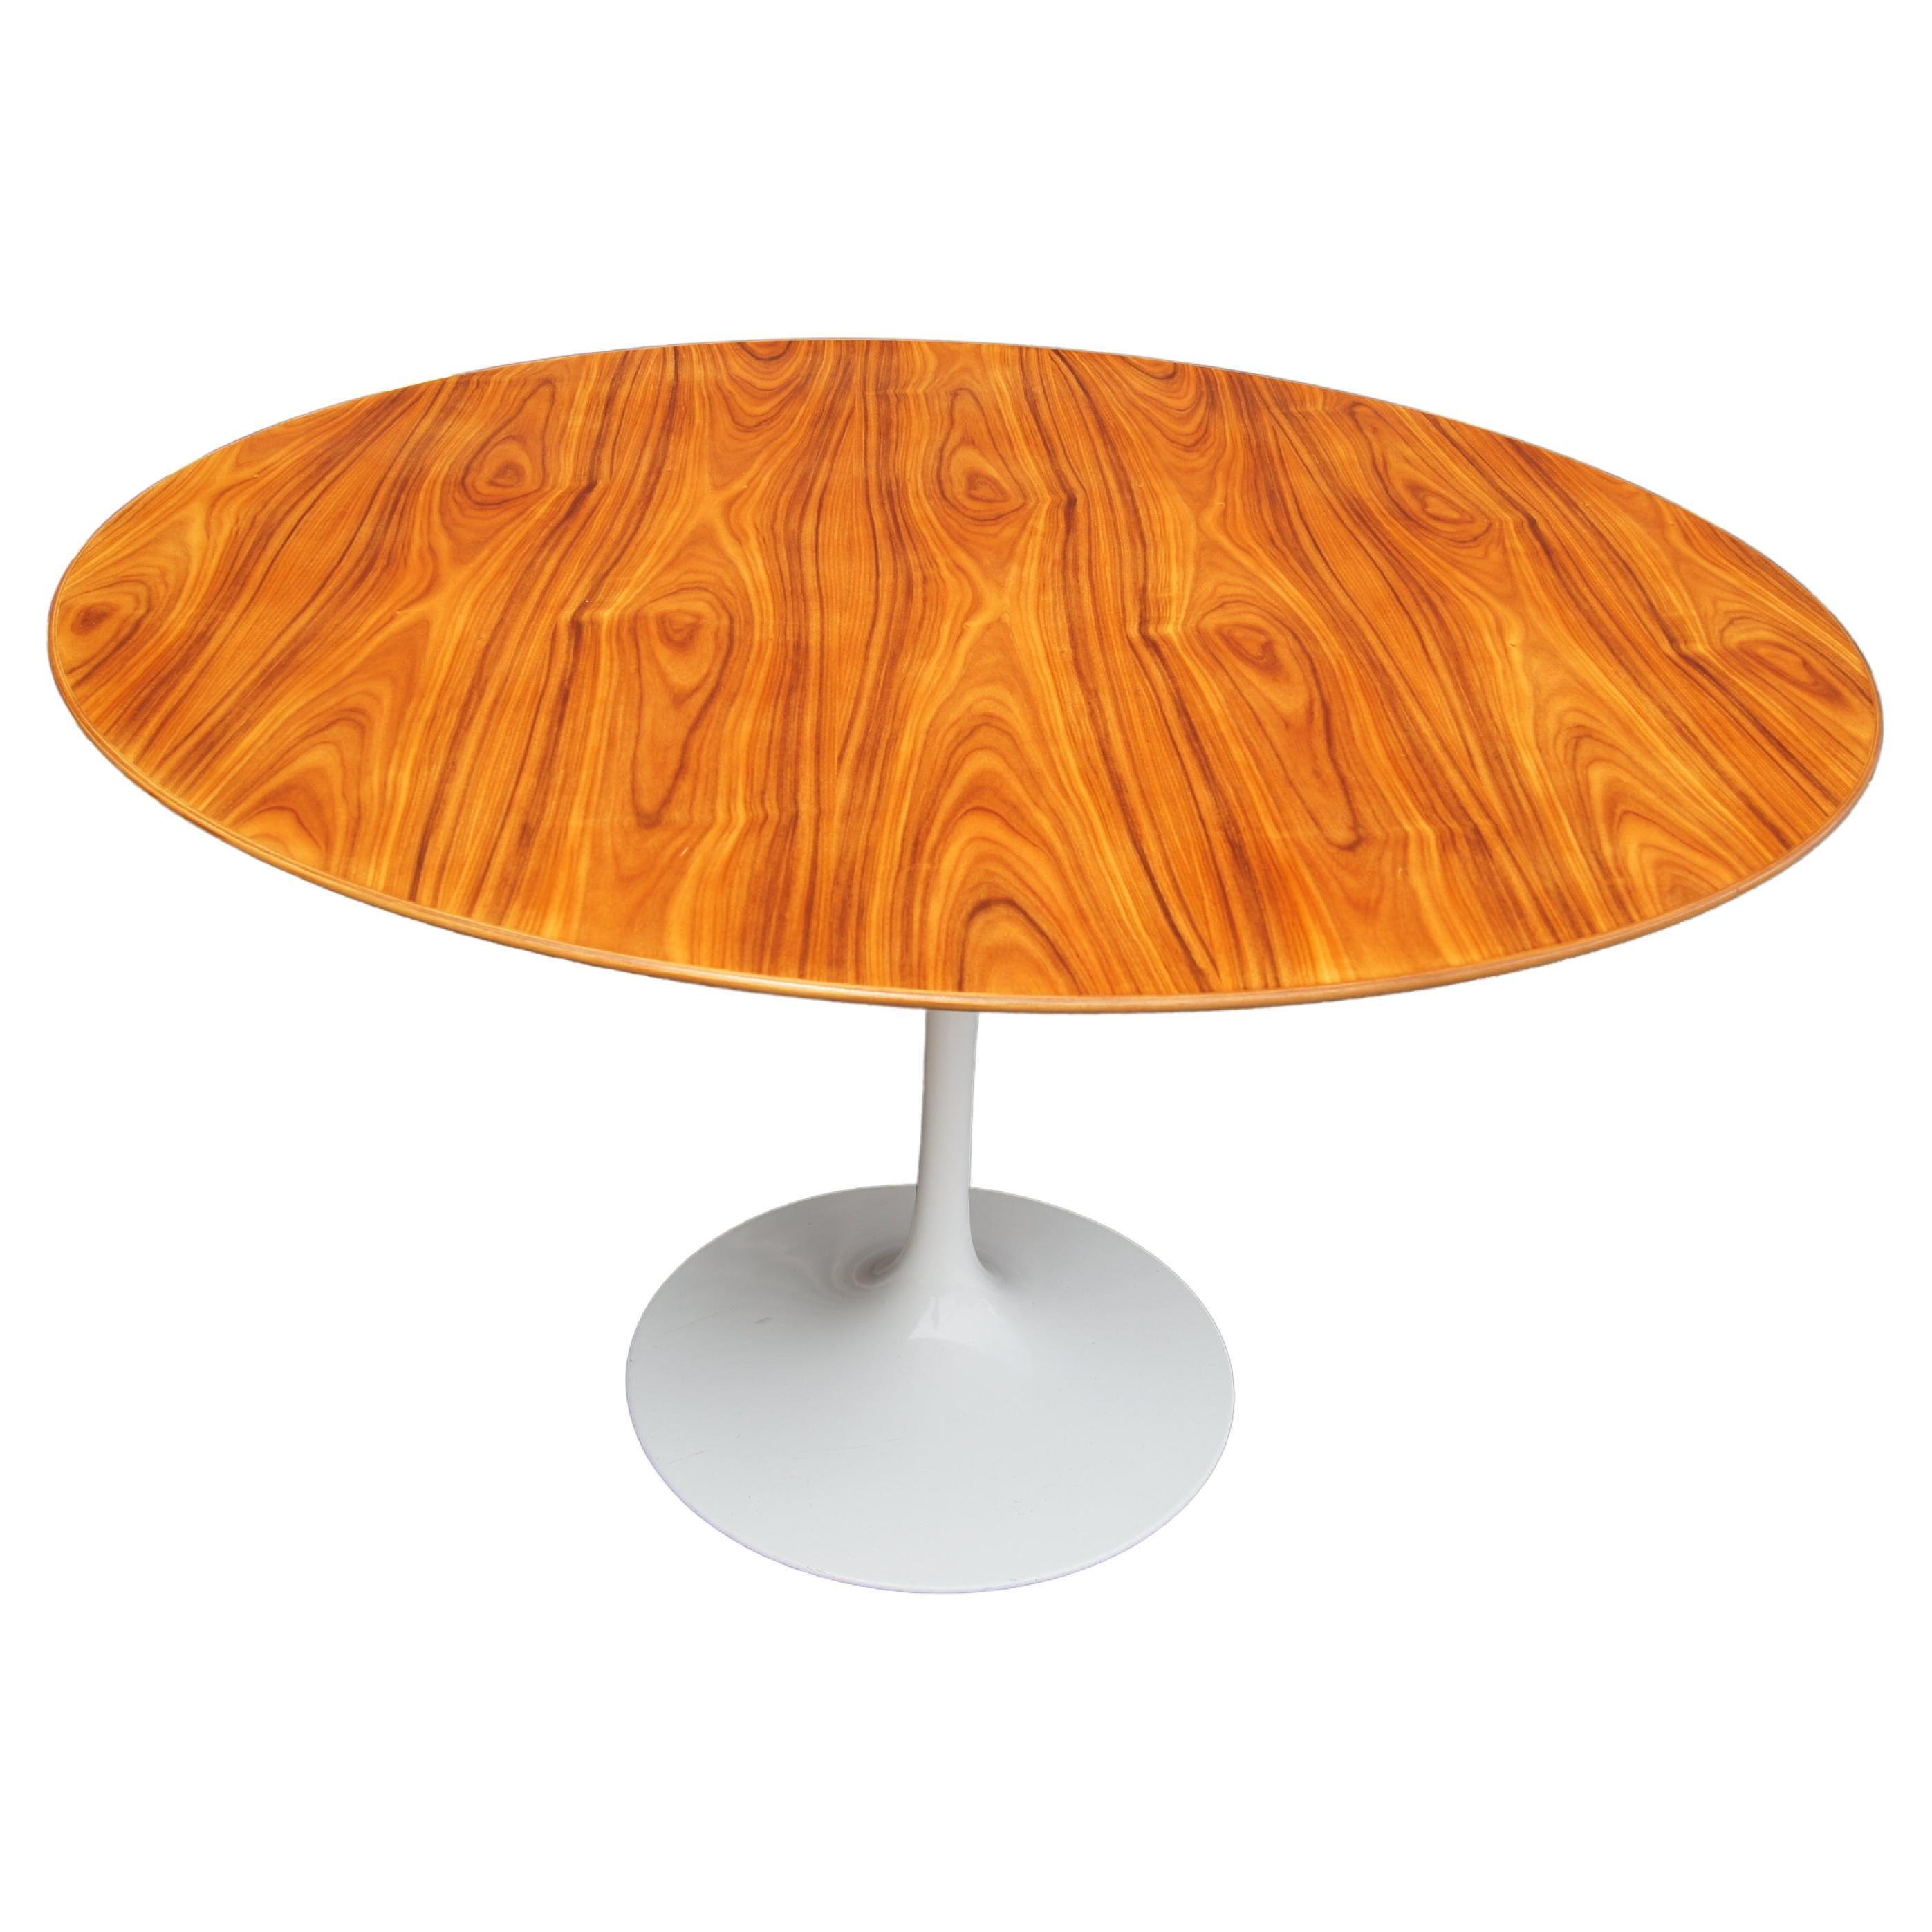 47" Walnut Pedestal Dining Table by Eero Saarinen for Knoll For Sale